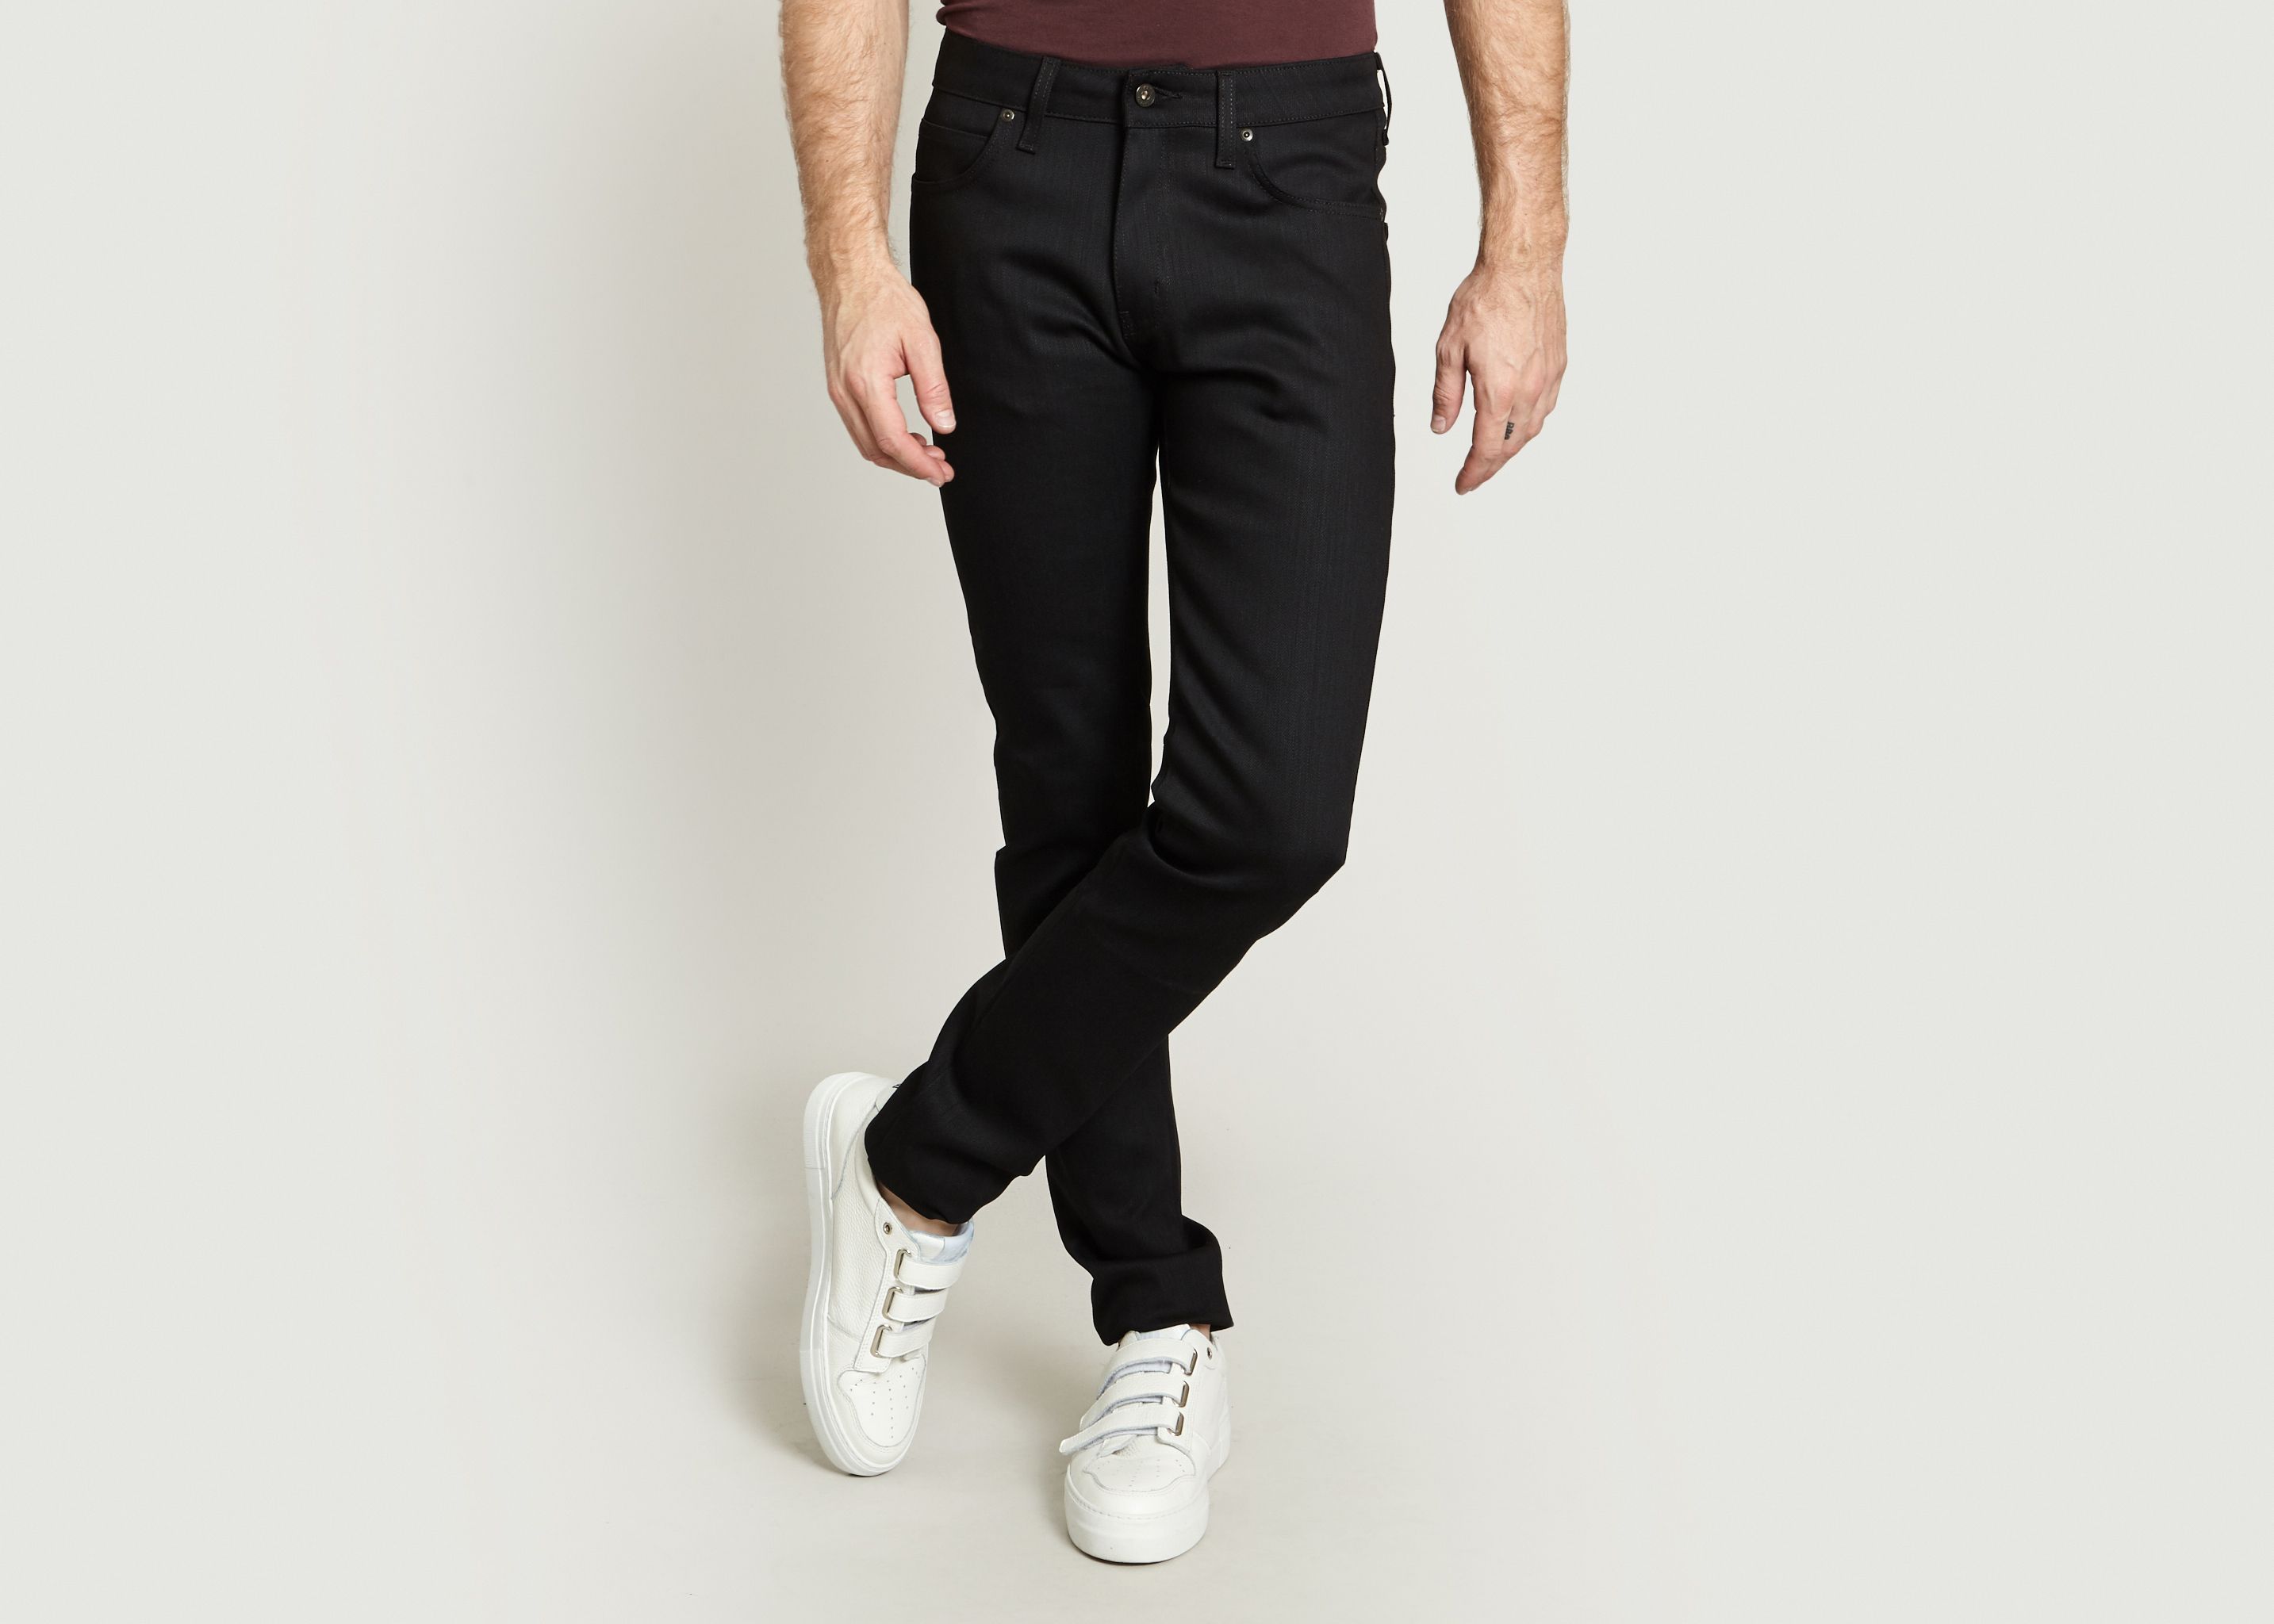 Jean Super Skinny Guy - Naked and Famous